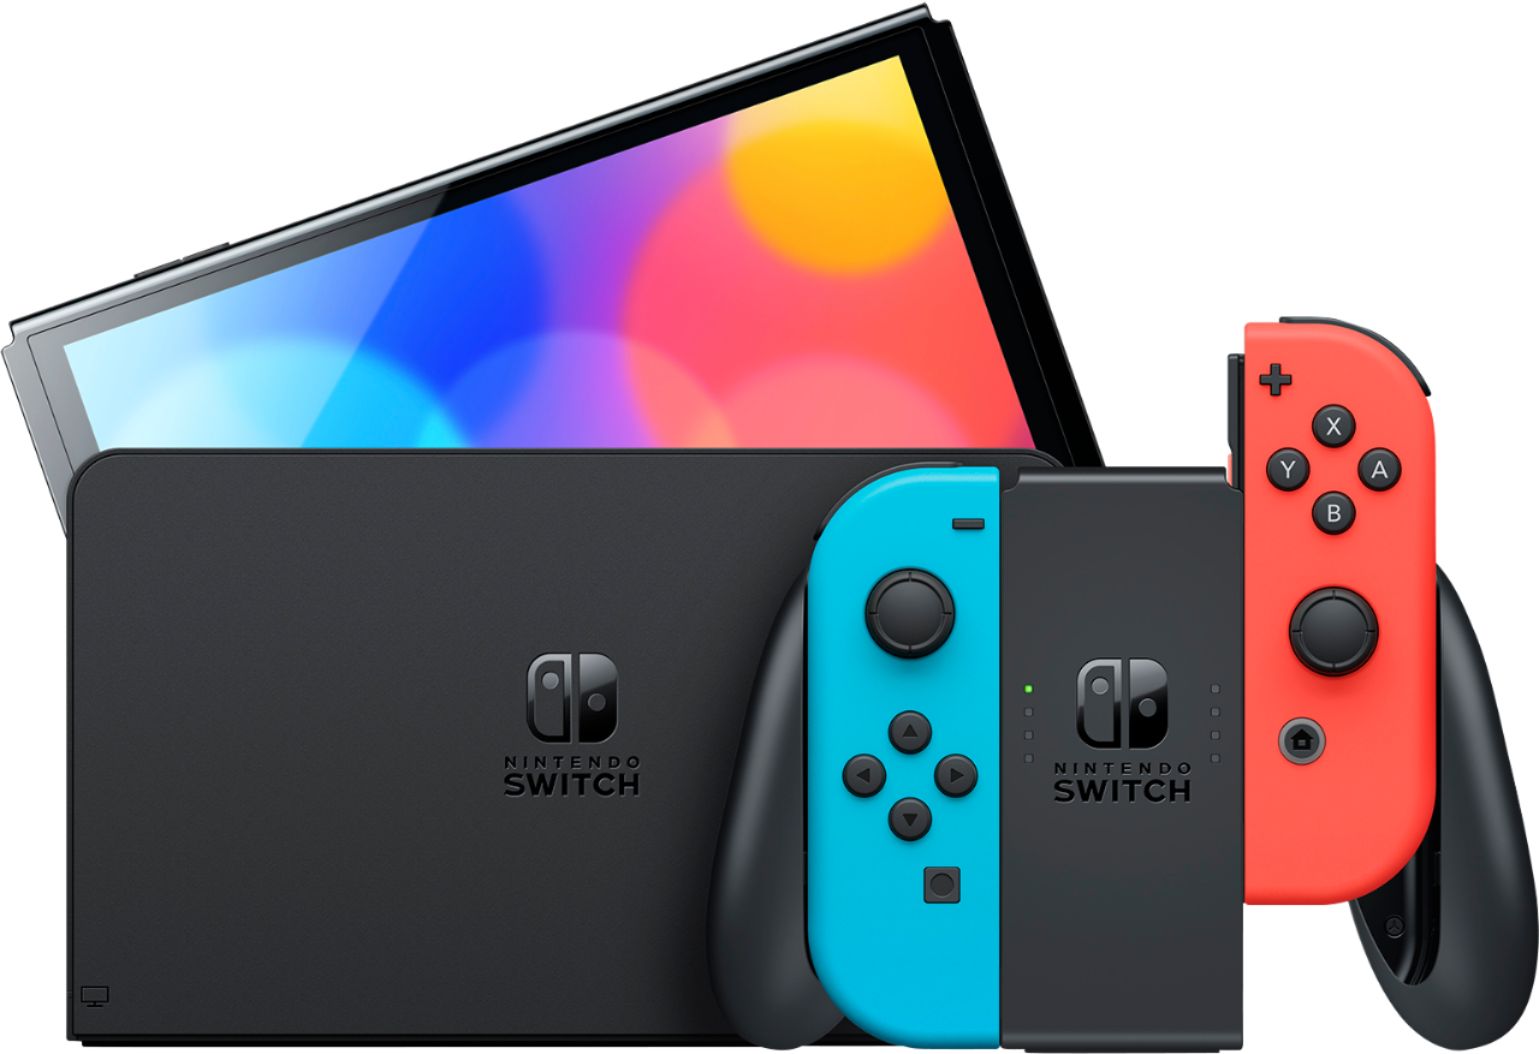 2022 New Nintendo Switch OLED Model Neon Red Blue with Super Mario Party and Mytrix Full Body Skin Sticker for NS OLED Console, Dock and Joycons - Sushi Set